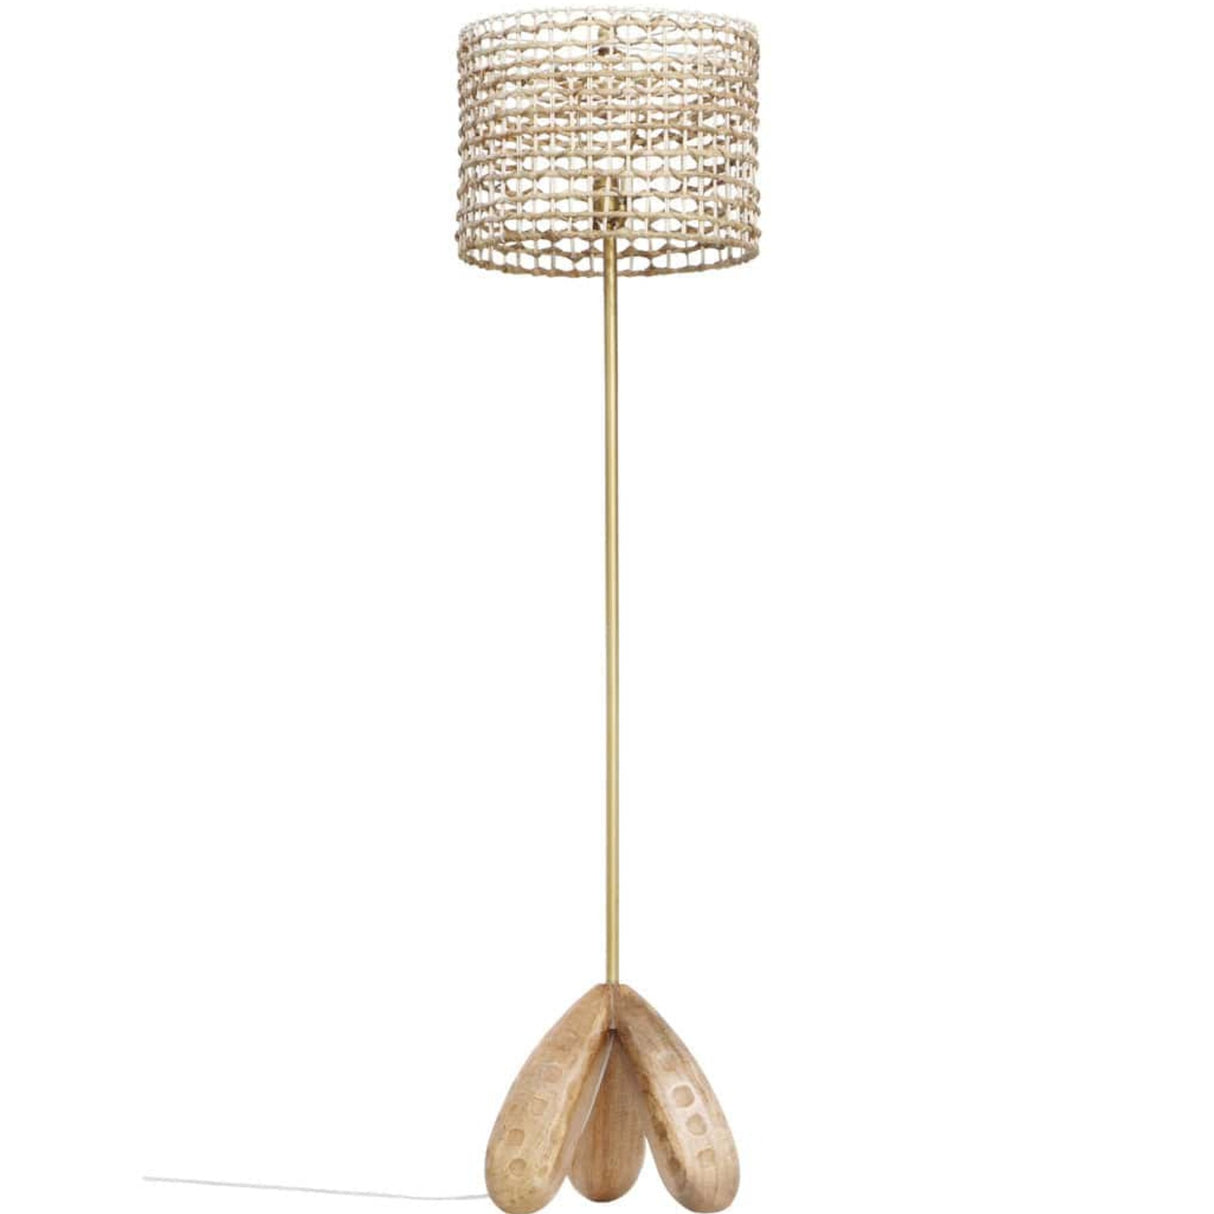 Candelabra Home Alondra Wooden Floor Lamp Floor Lamp with woven shade TOV-G18482